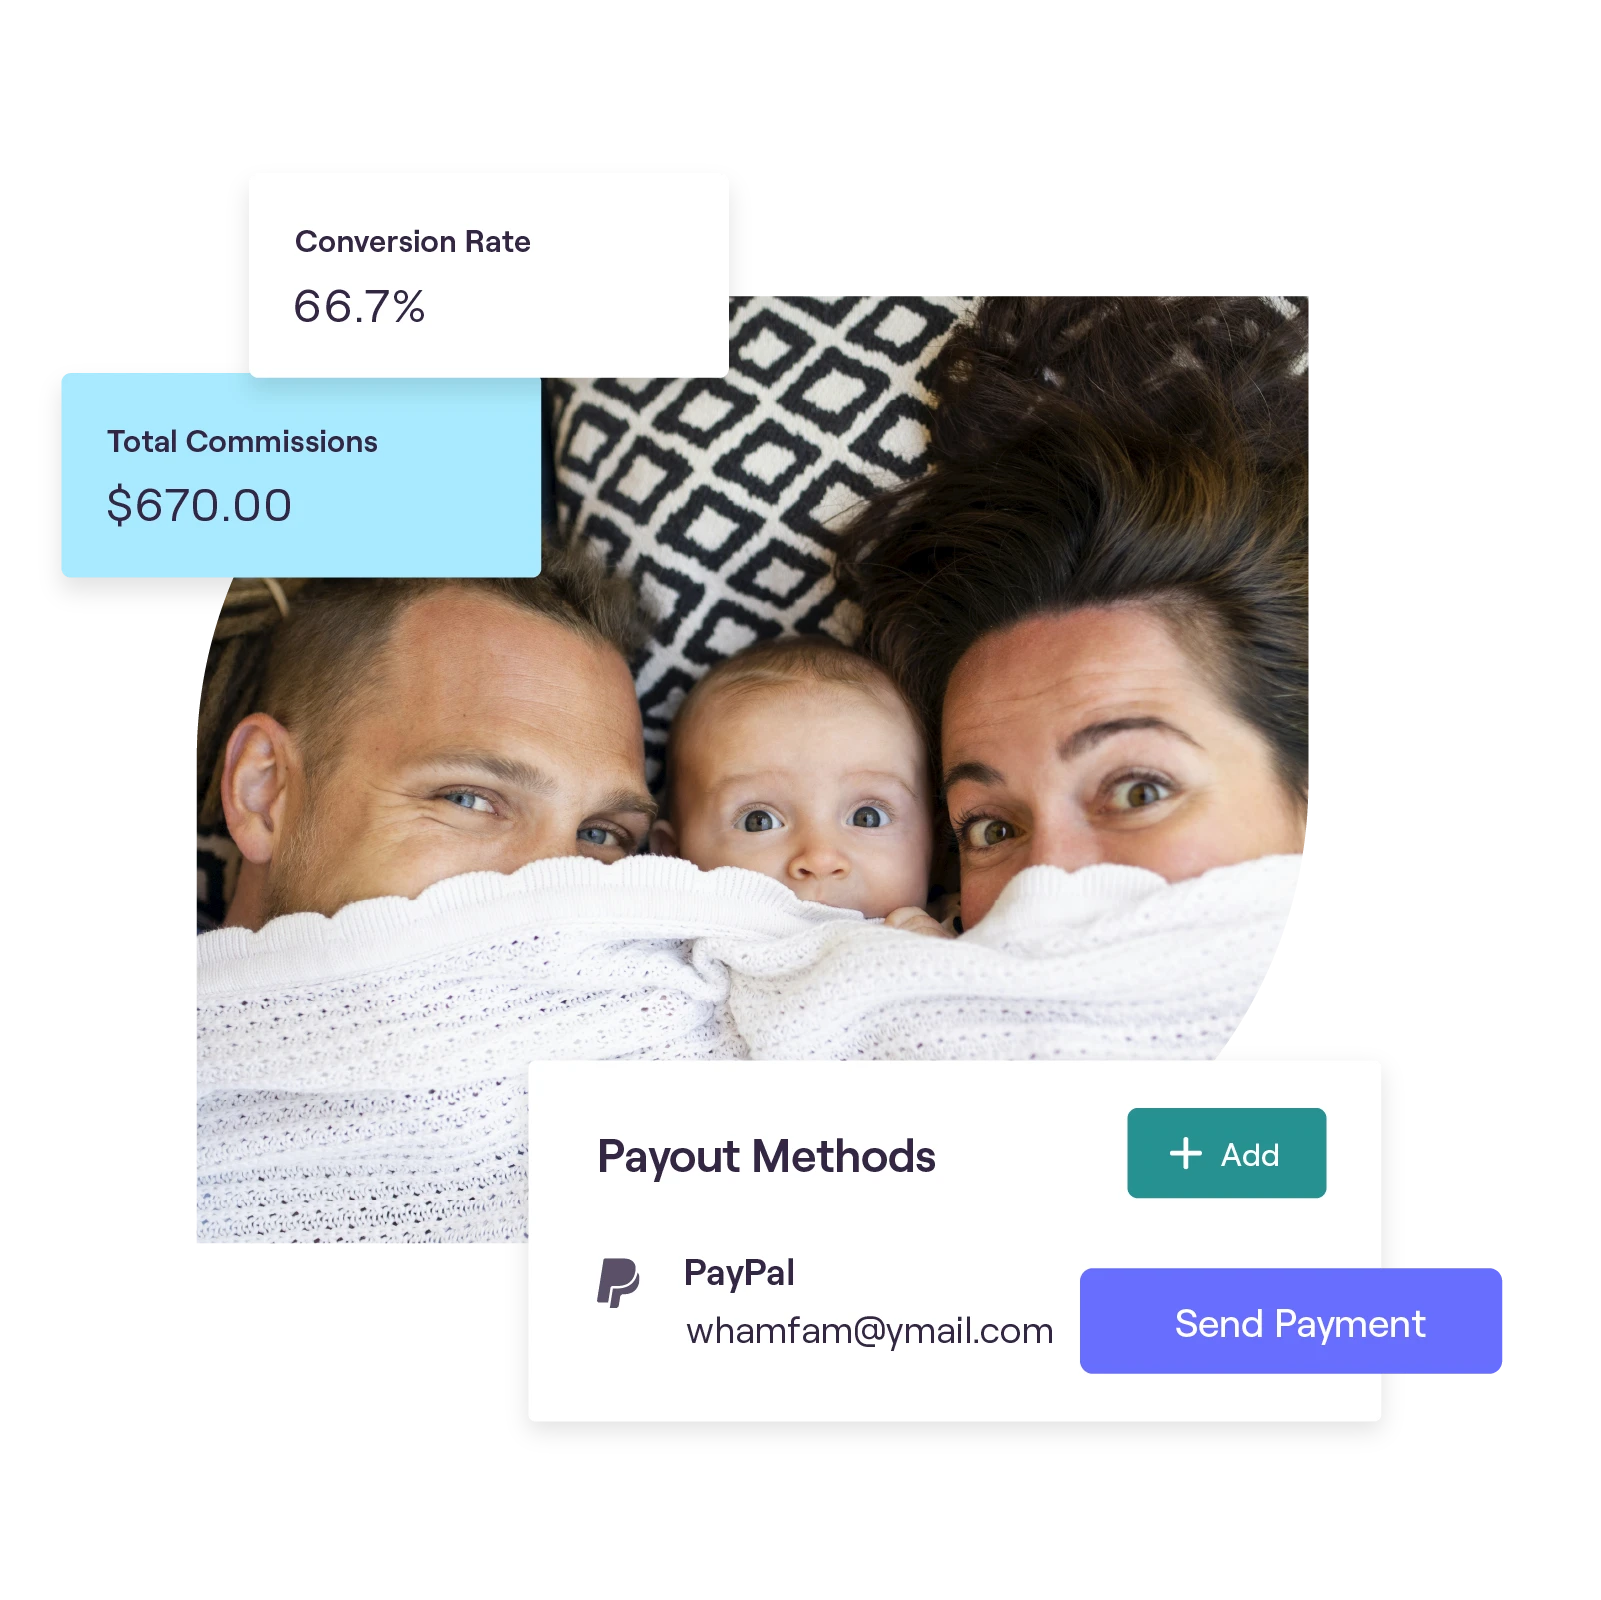 Stylized image of a family next to conversion rates and payment information